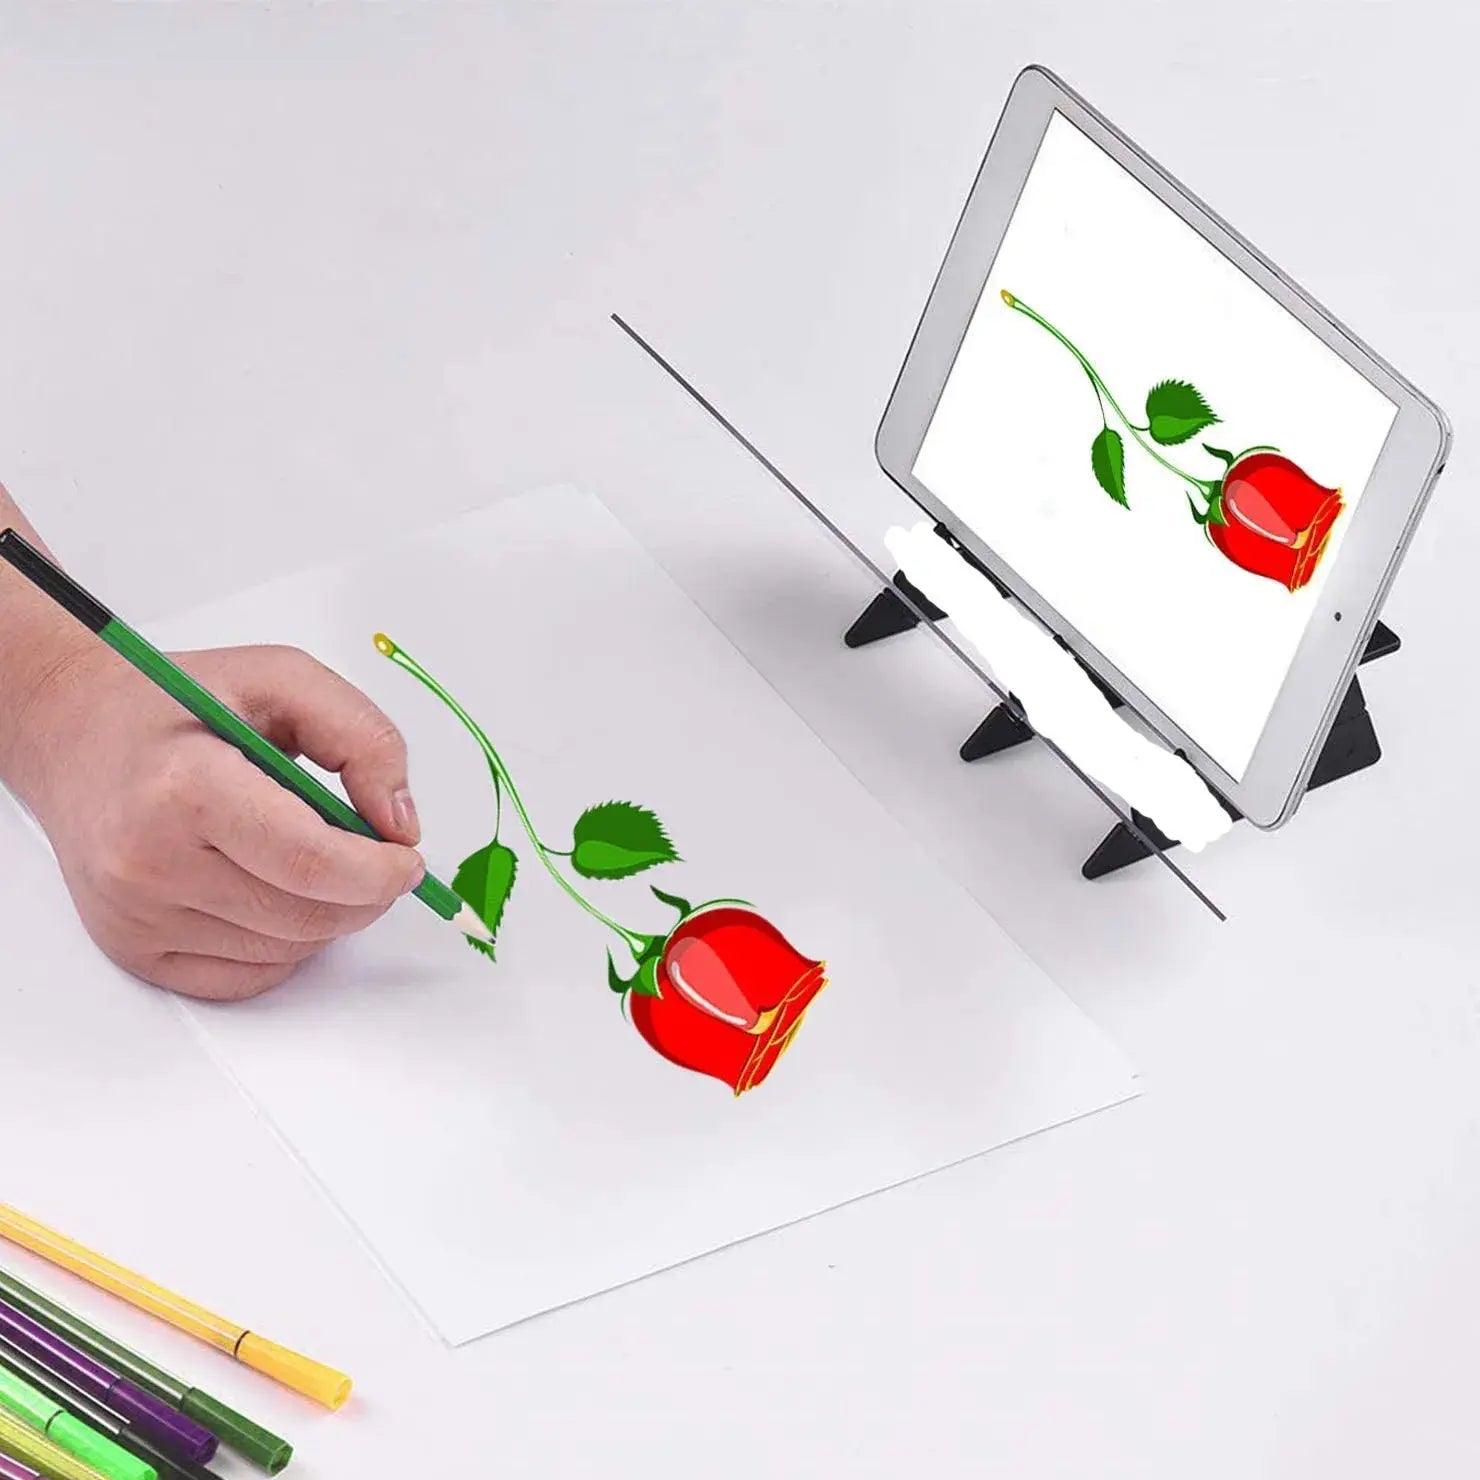 Painting Reflection Tracing Line - ACO Marketplace